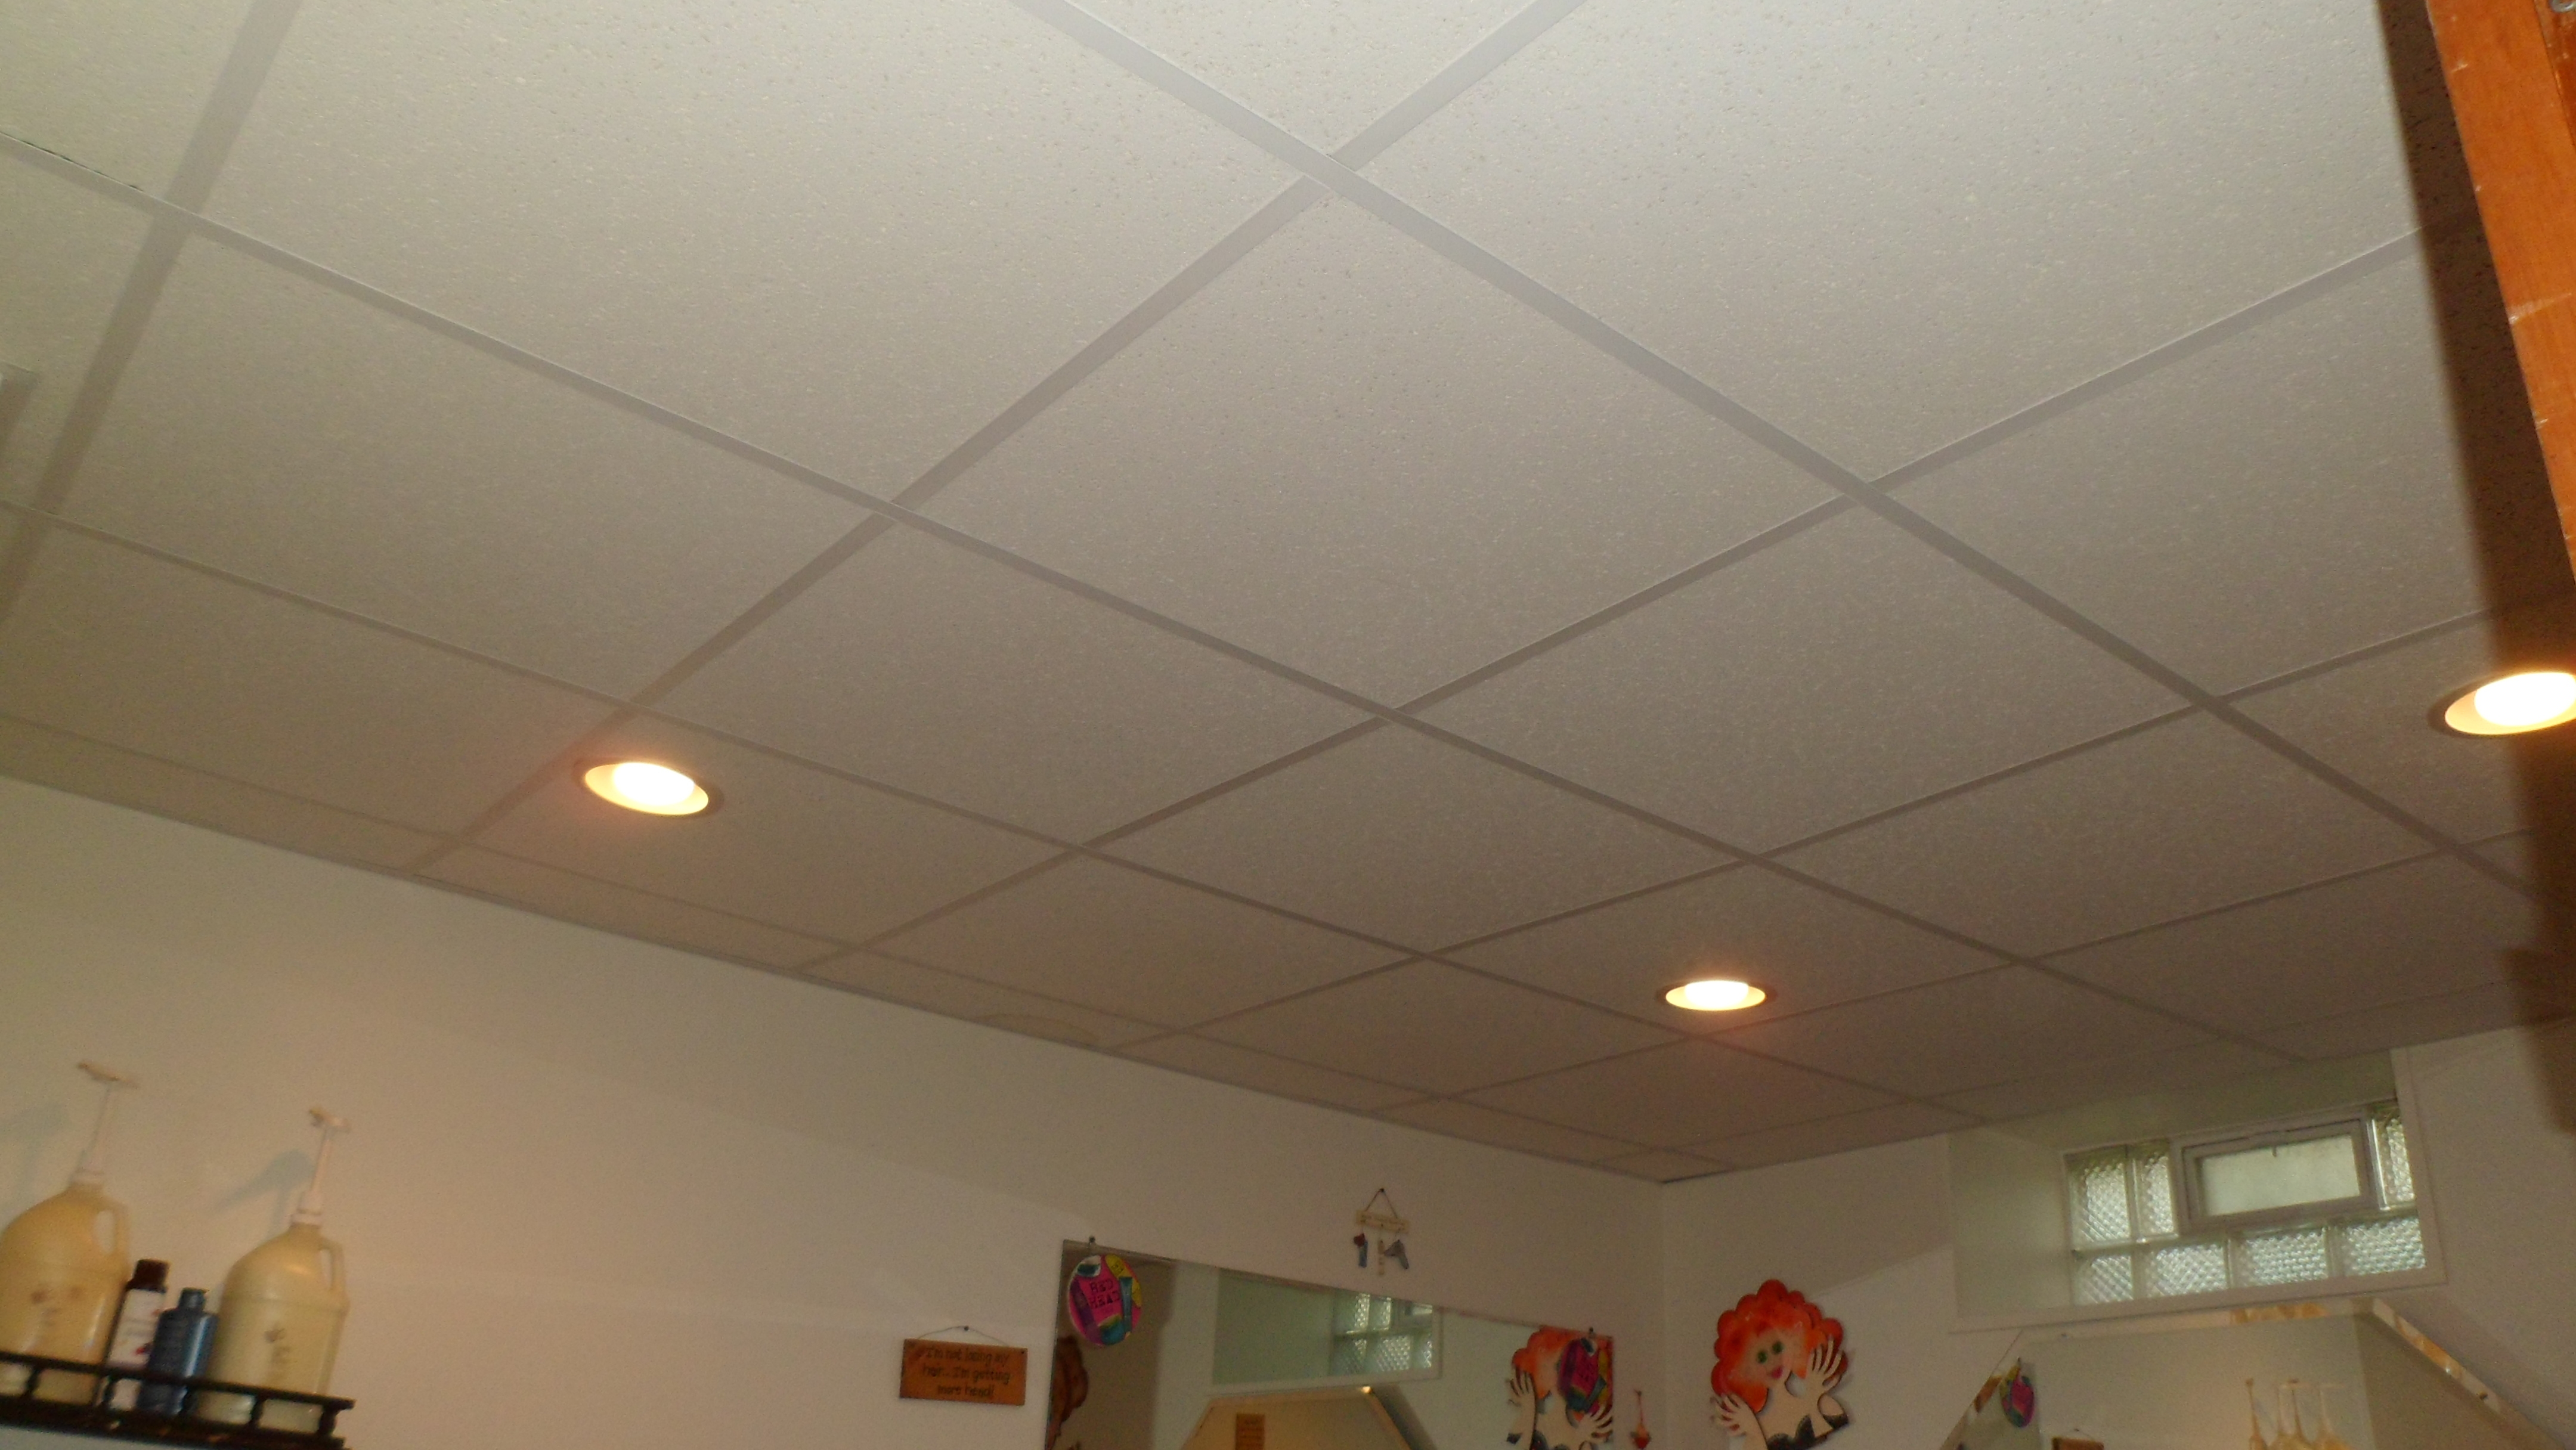 Drop Ceiling Lights Recessed4320 X 2432